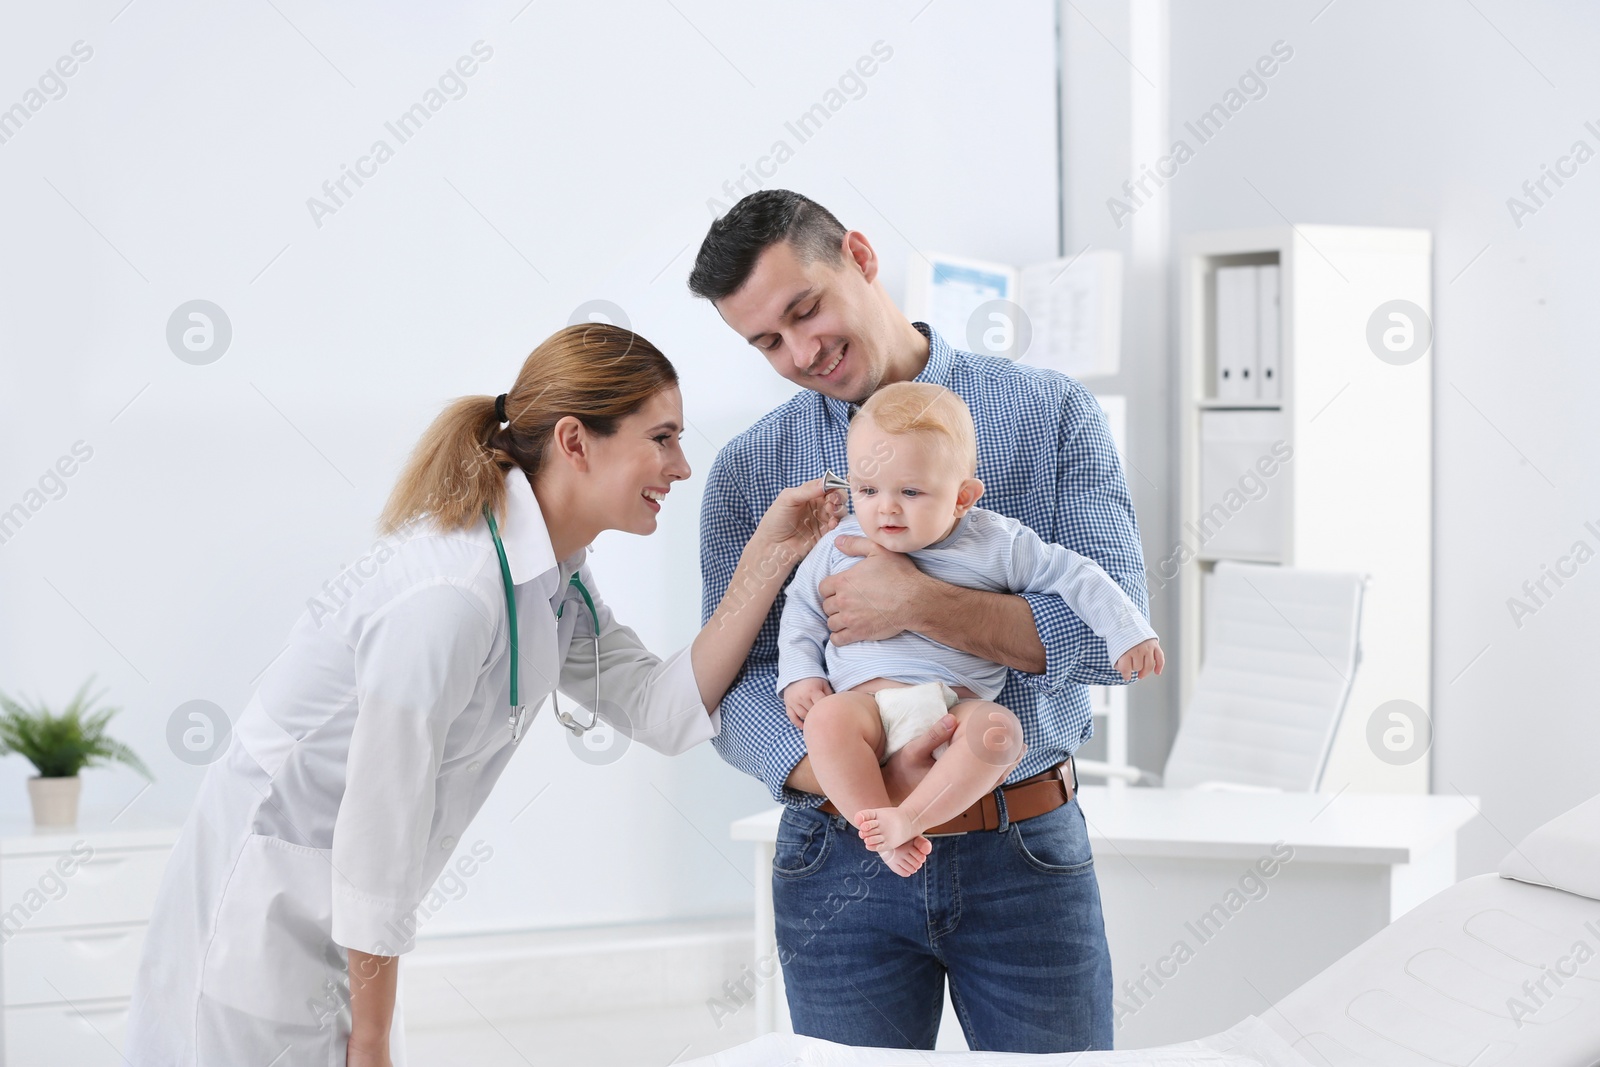 Photo of Man with his baby visiting children's doctor in hospital